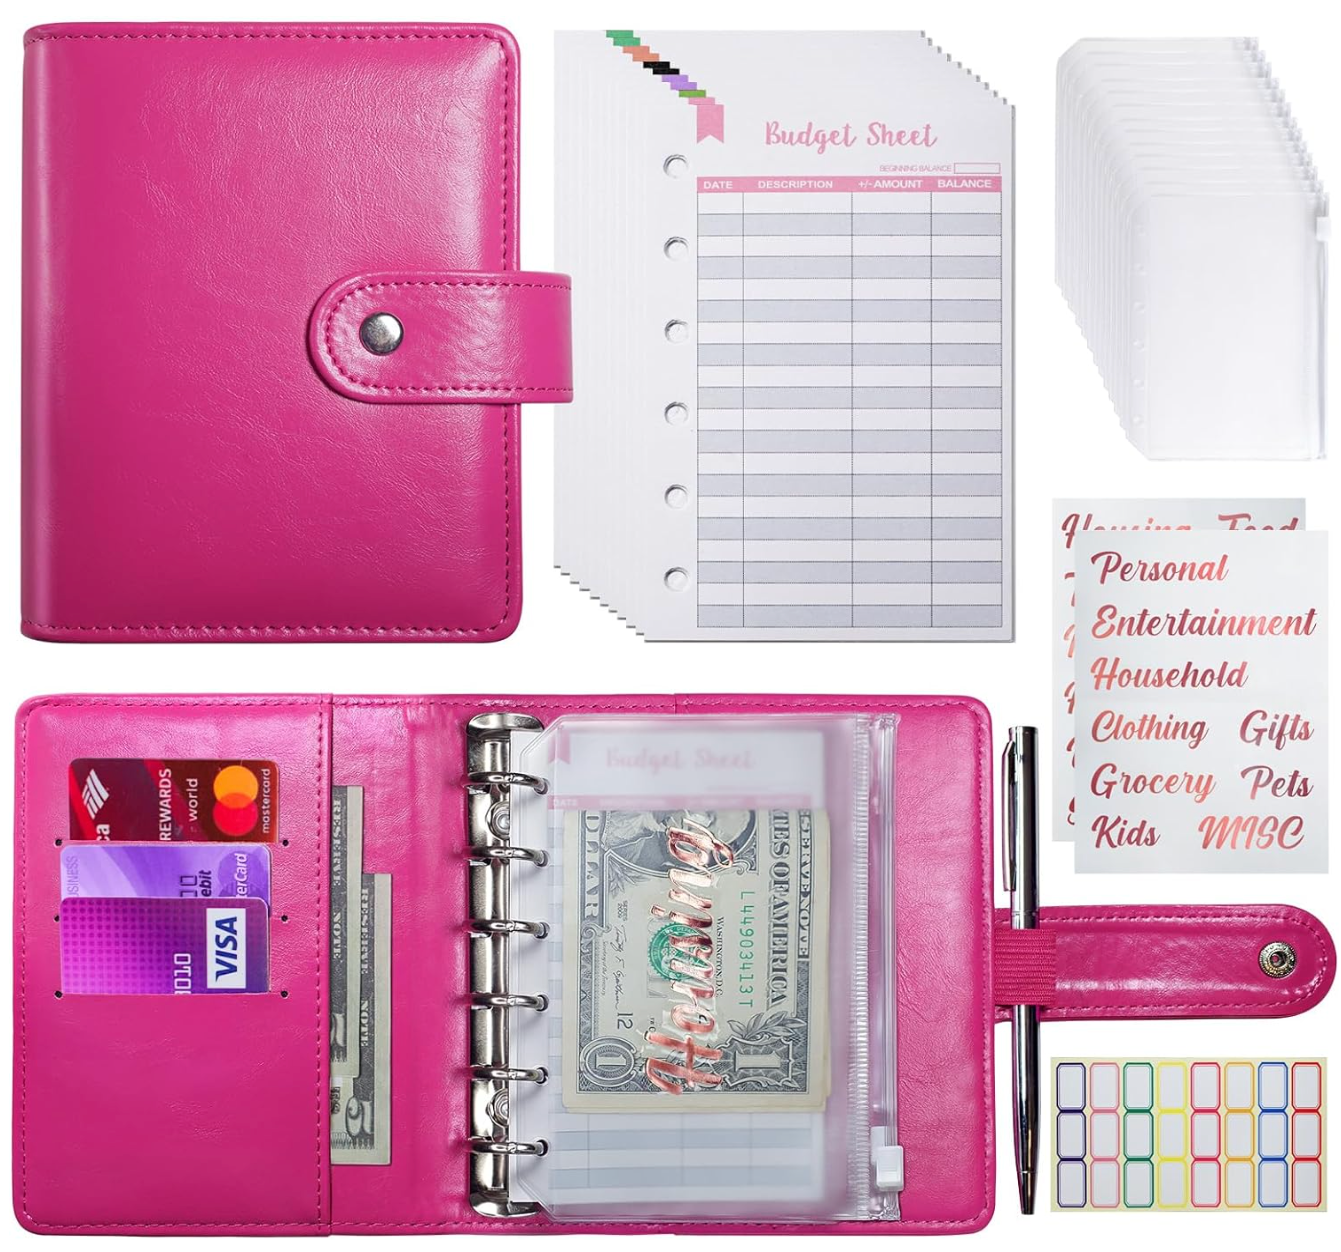 The Rich Girl Lifestyle Hot Pink Mini Binder Wallet for Cash